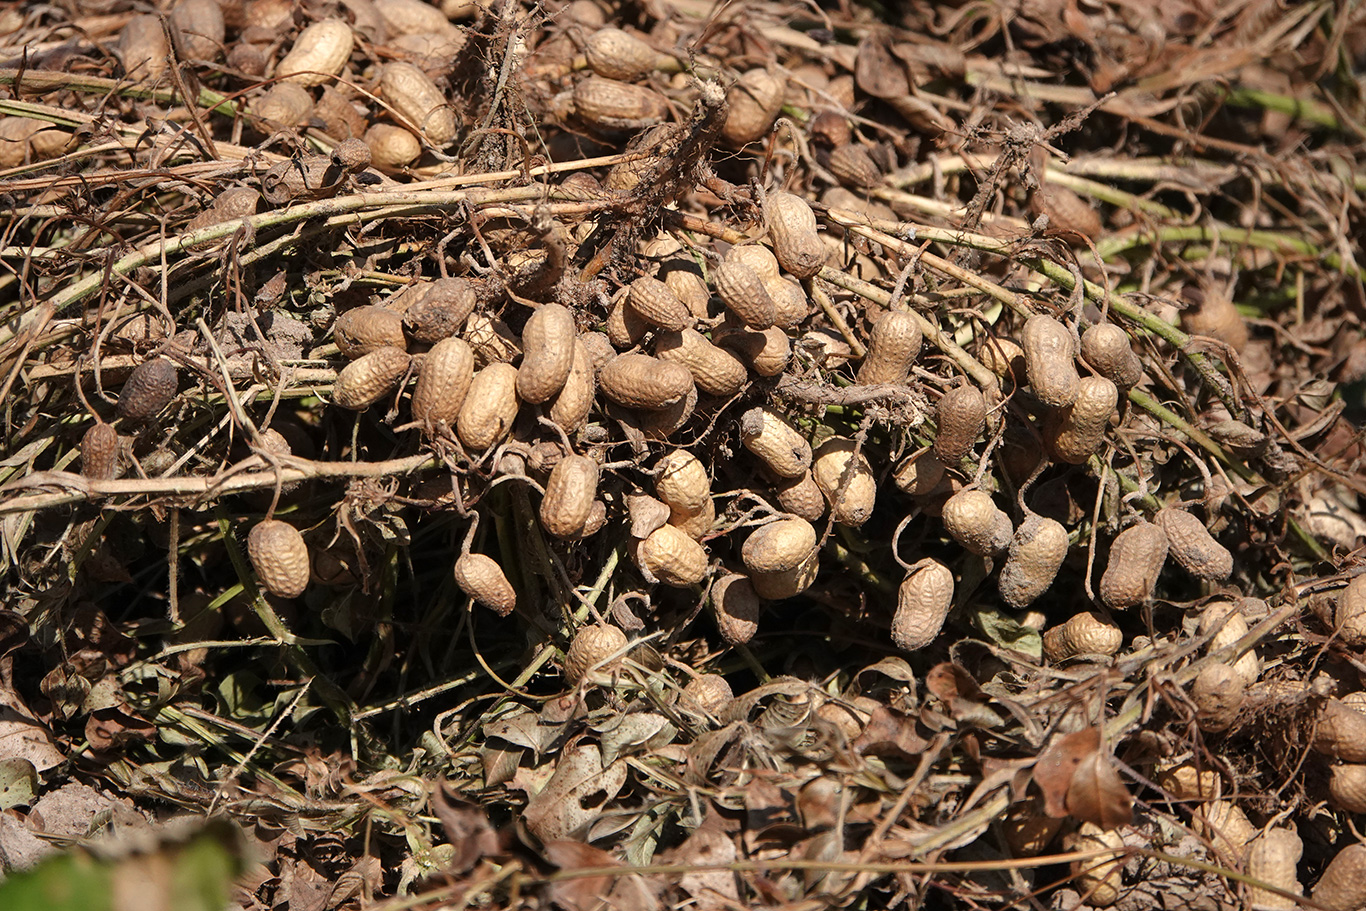  Peanut Crop, Tujereng, The Gambia.